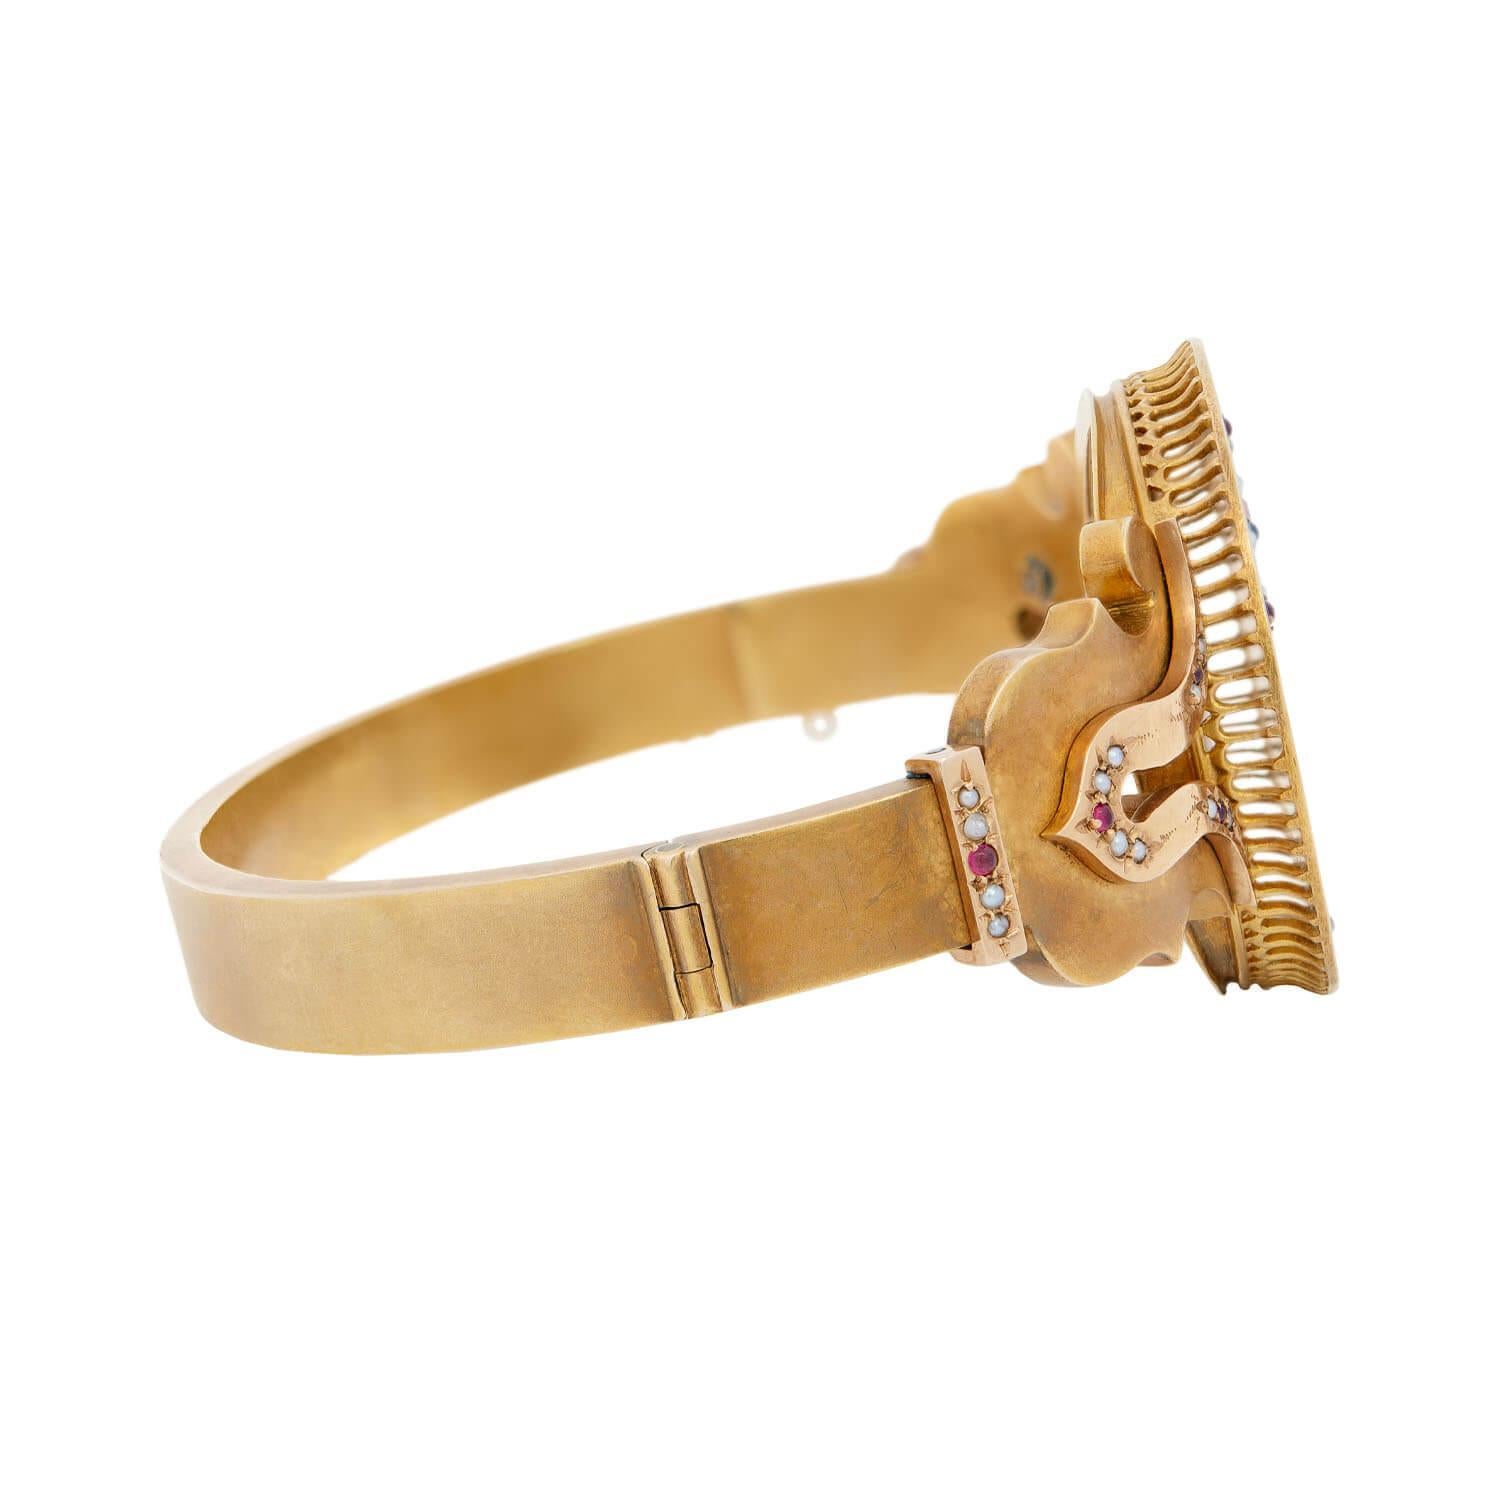 An unusual padlock bracelet from the Victorian (ca1880) era! This stylish bangle bracelet is made of 18k vibrant yellow gold, and features a circular centerpiece at the front detailed with intricate enamel and engraving. The centerpiece is decorated